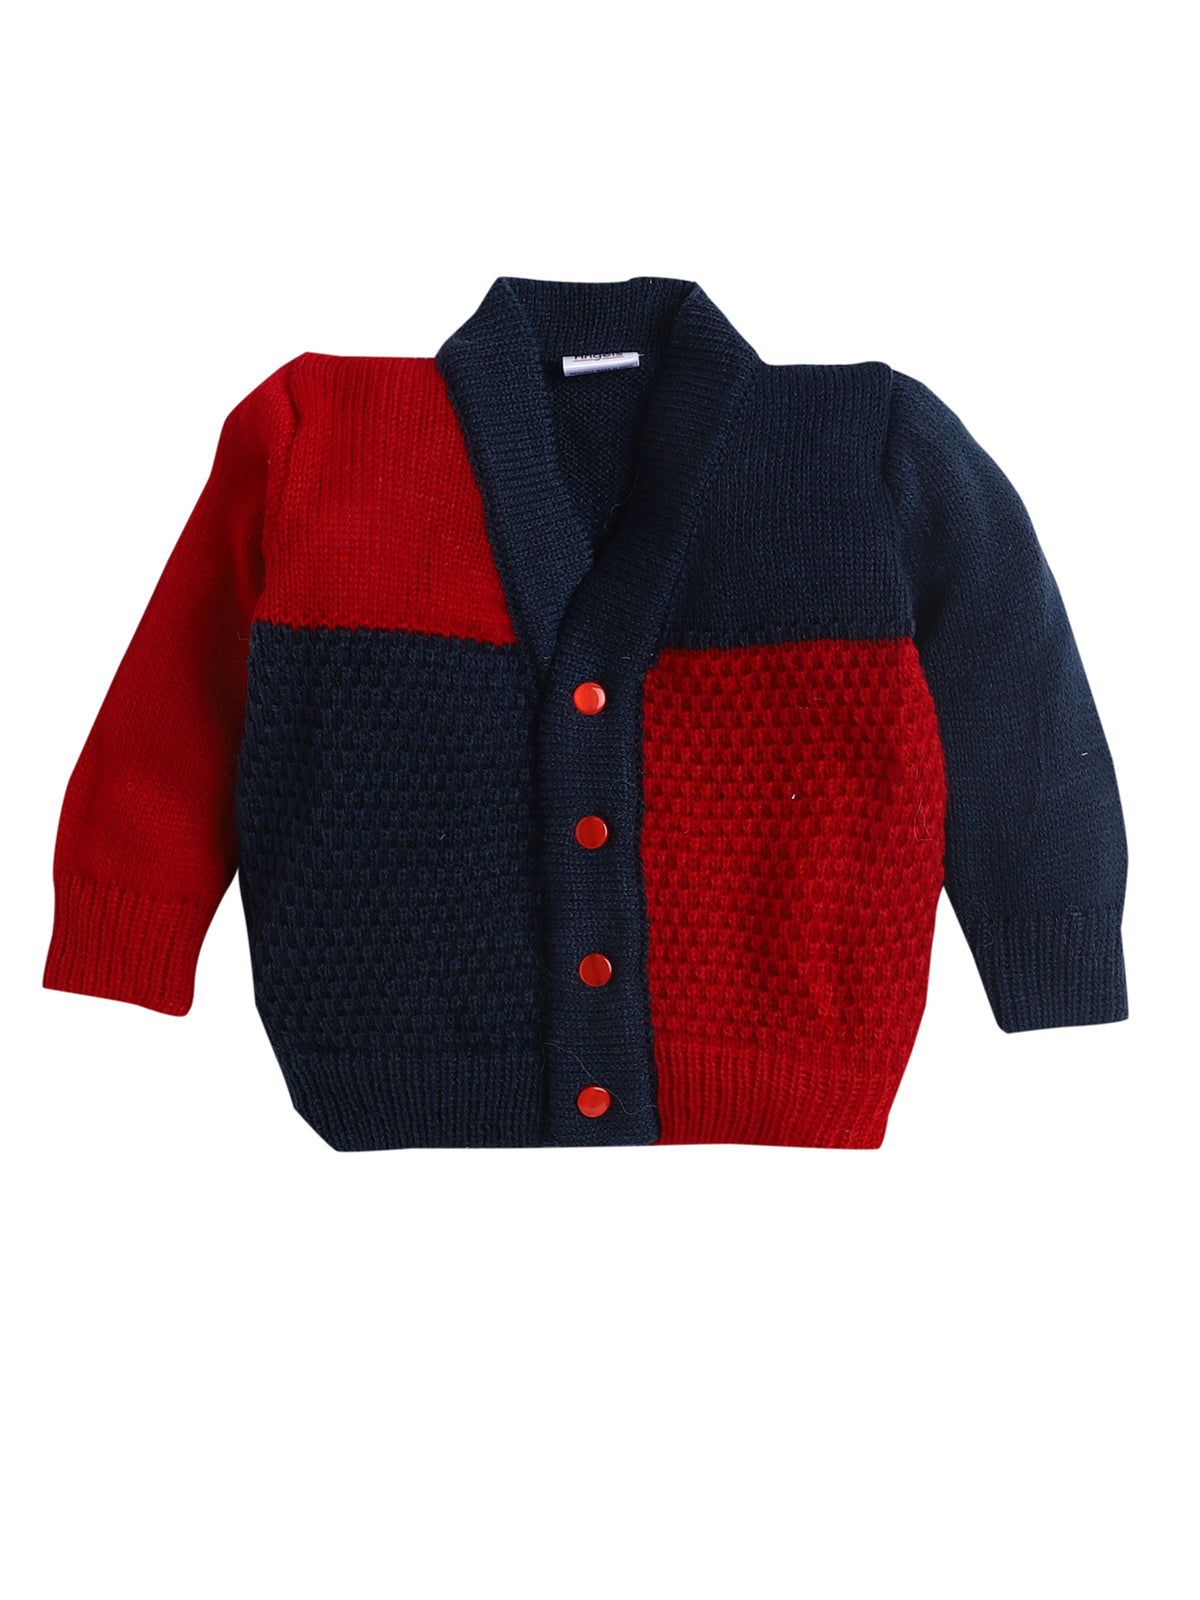 Full sleeves front open red and navy color sweater with matching cap and socks for baby